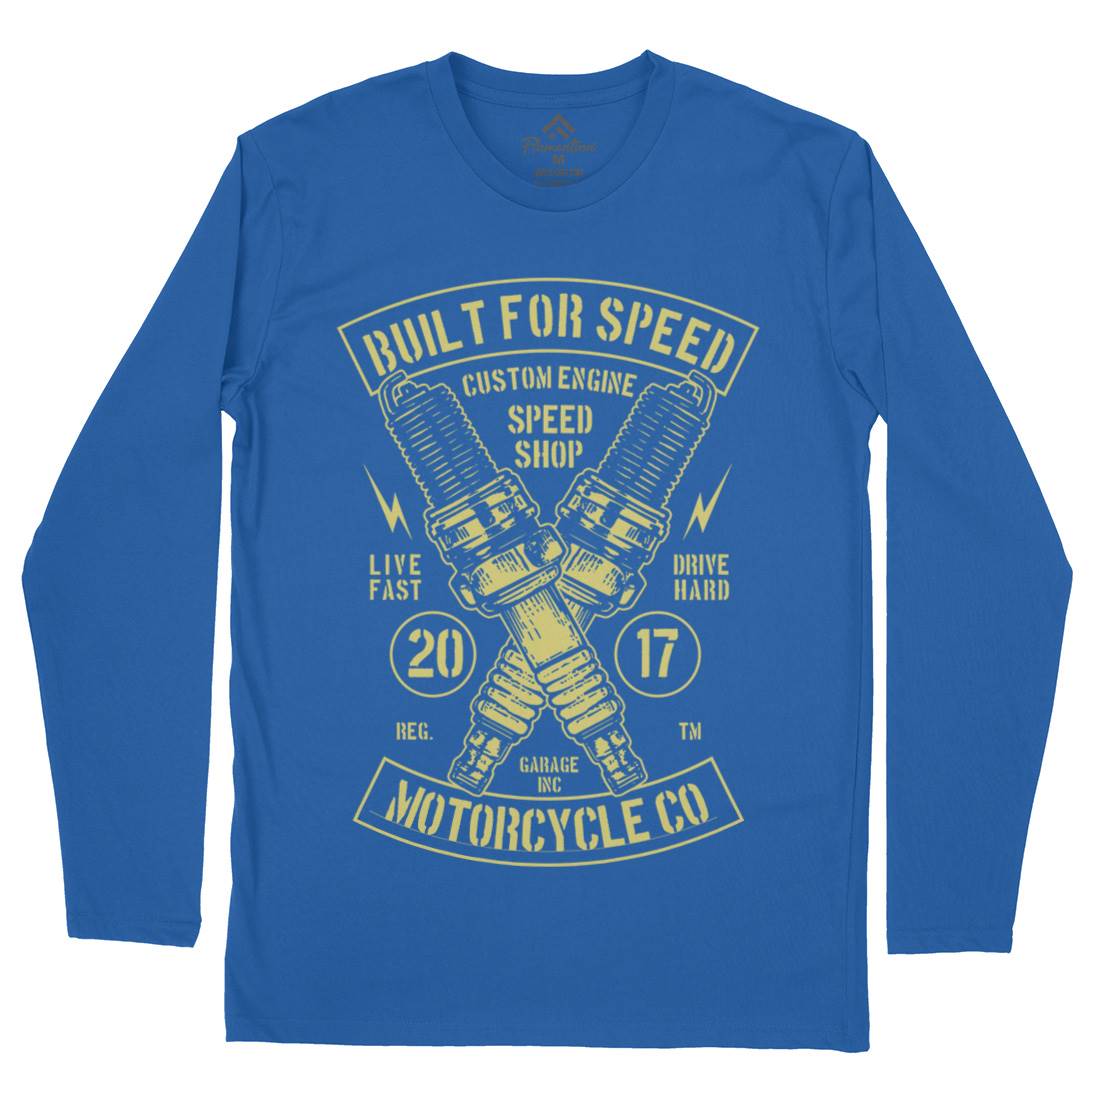 Built For Speed Mens Long Sleeve T-Shirt Motorcycles B188